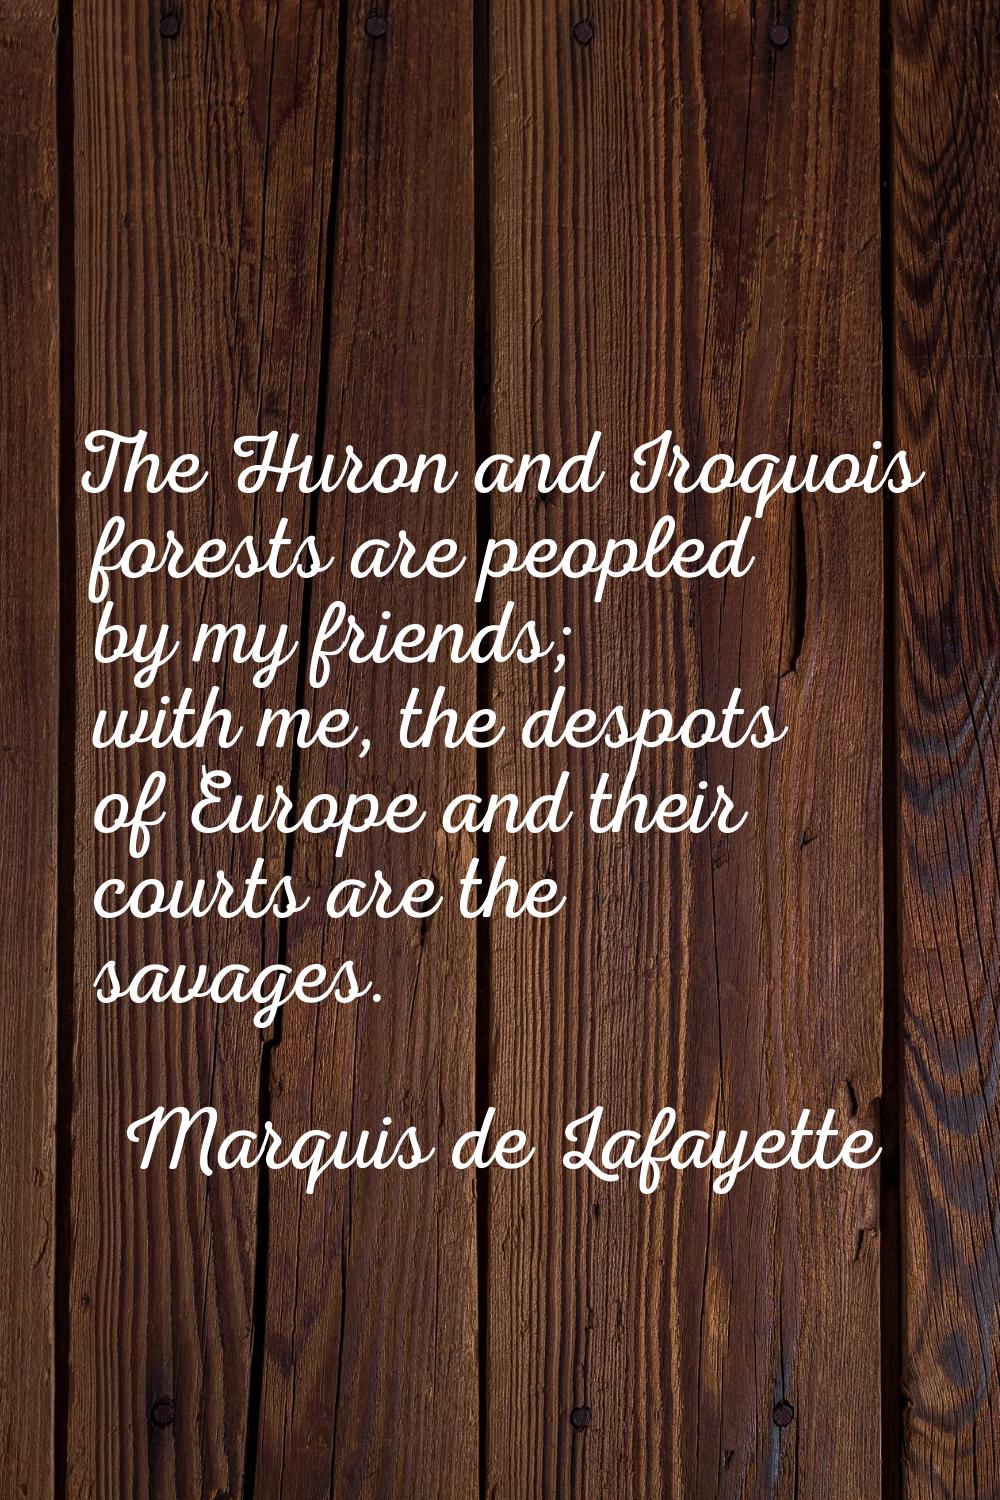 The Huron and Iroquois forests are peopled by my friends; with me, the despots of Europe and their 